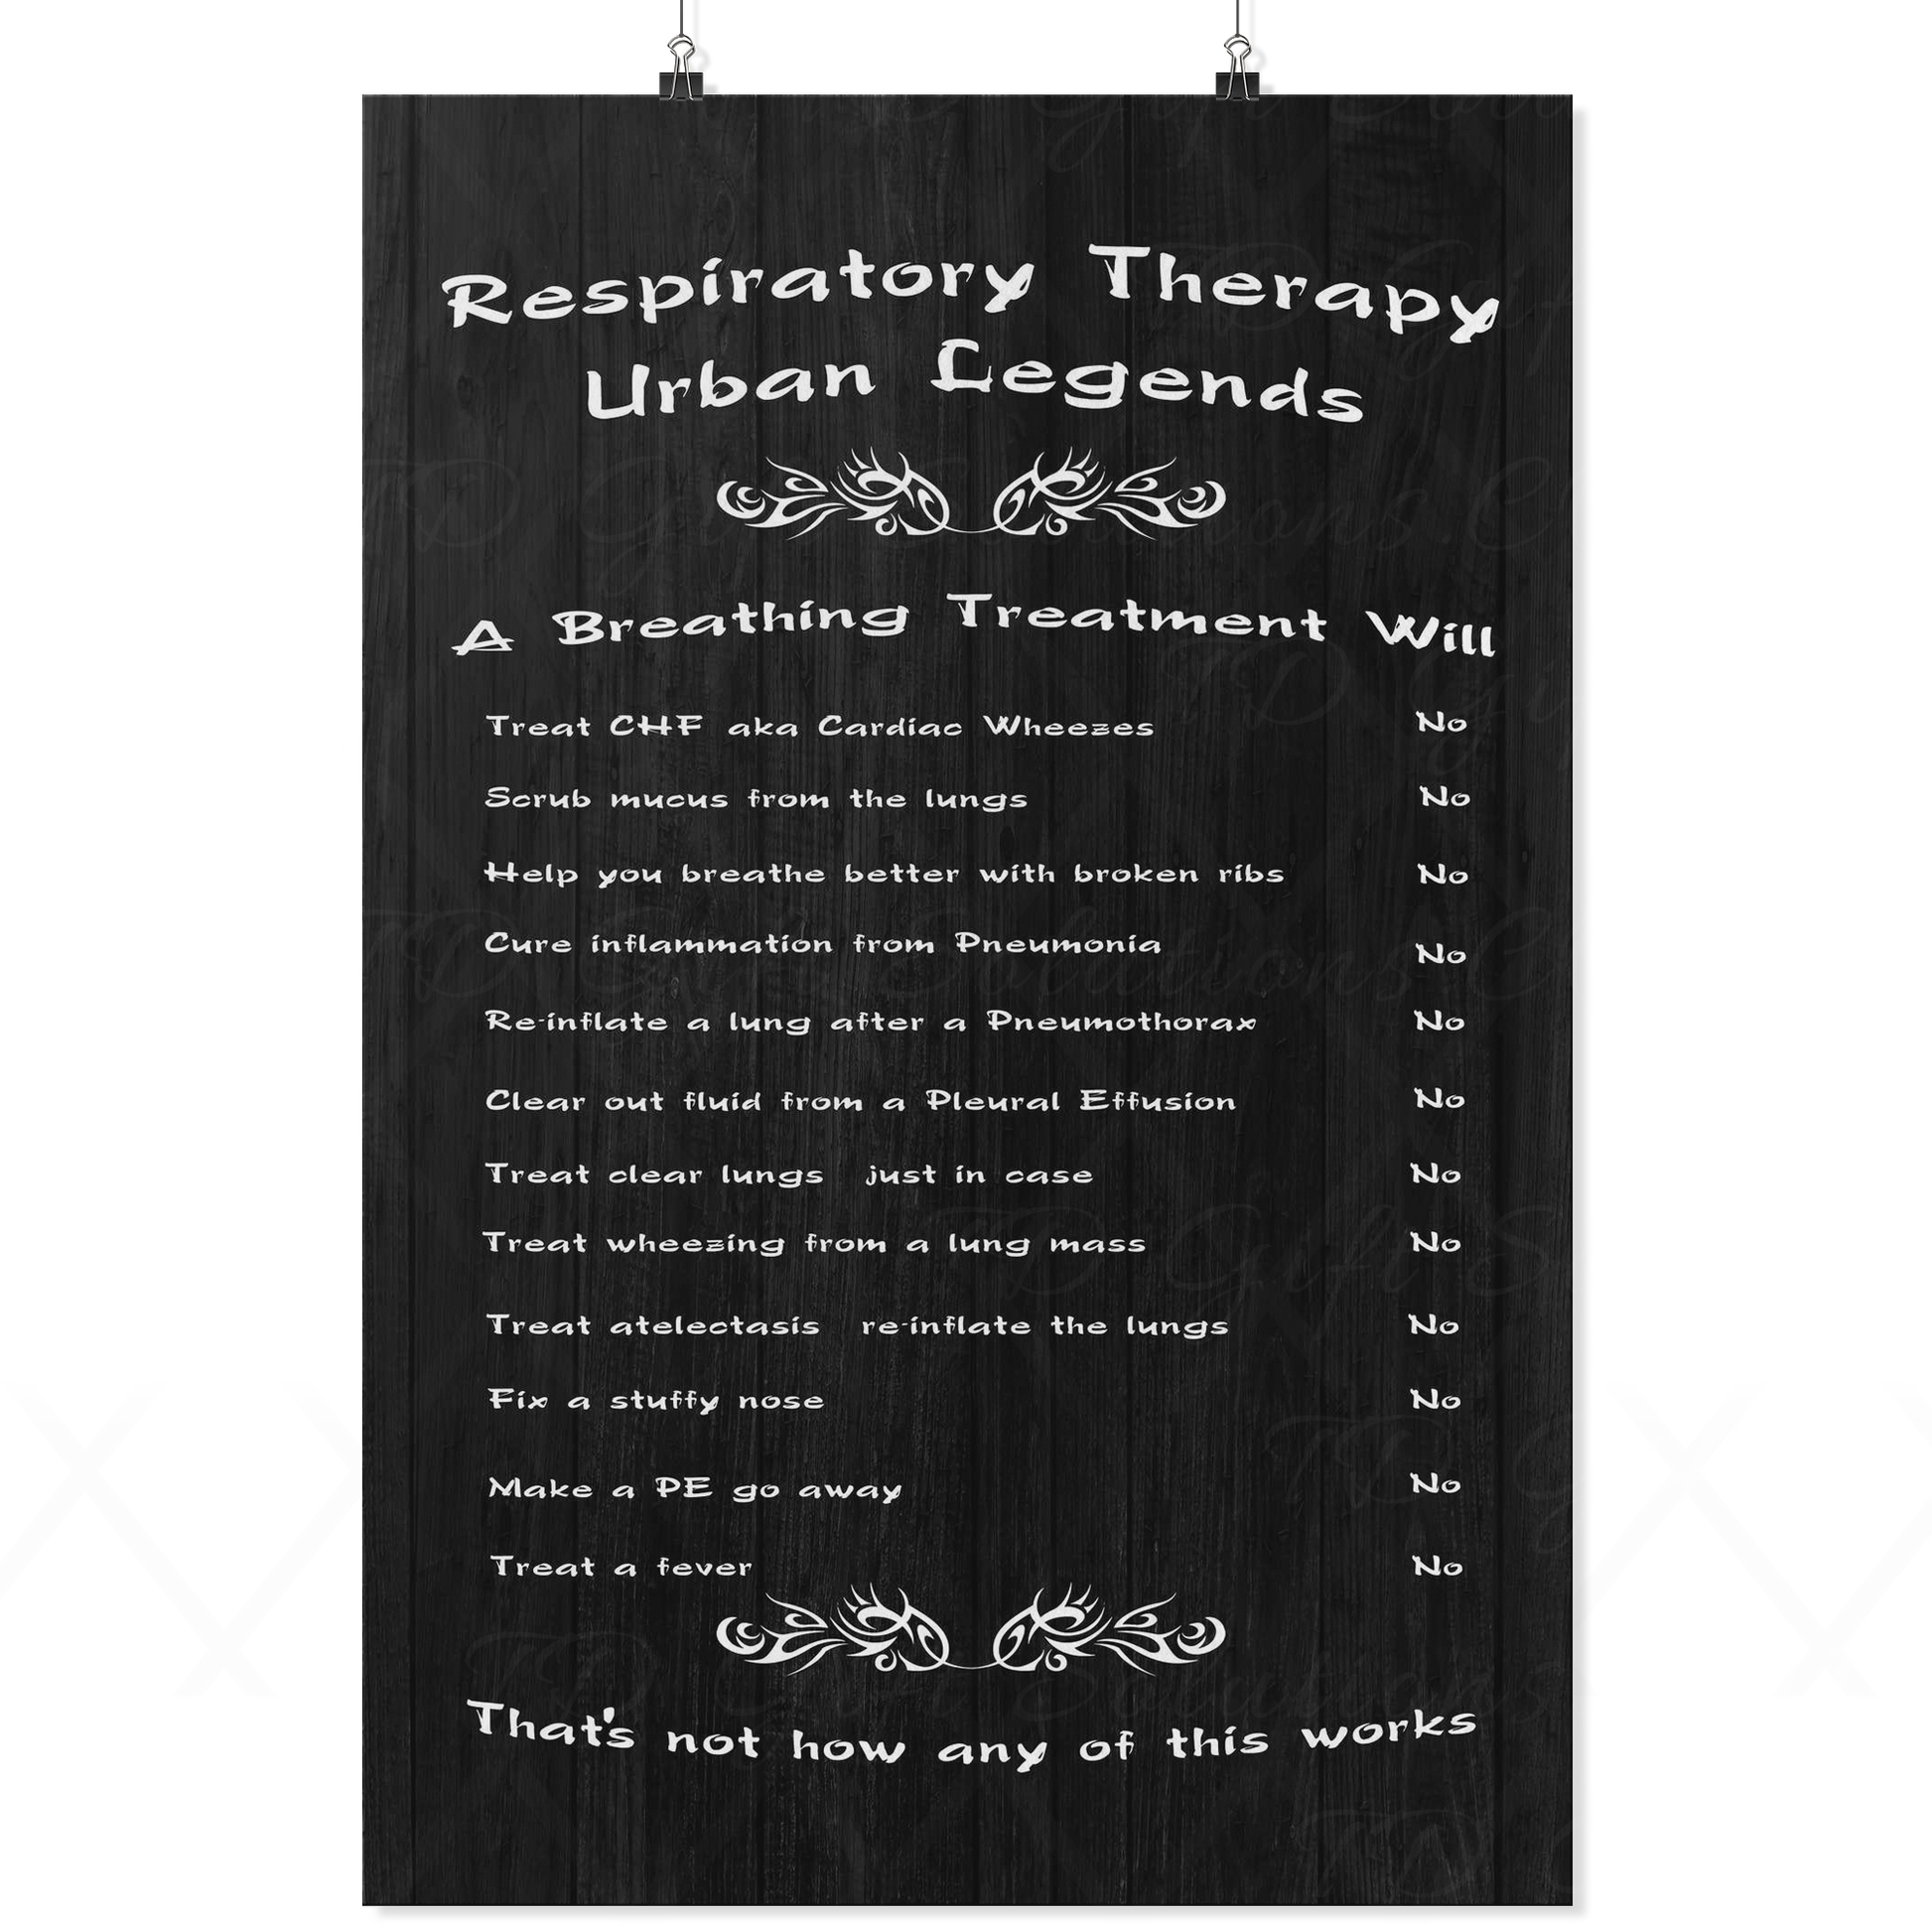 Respiratory Therapy Urban Legends Poster-TD Gift Solutions.com